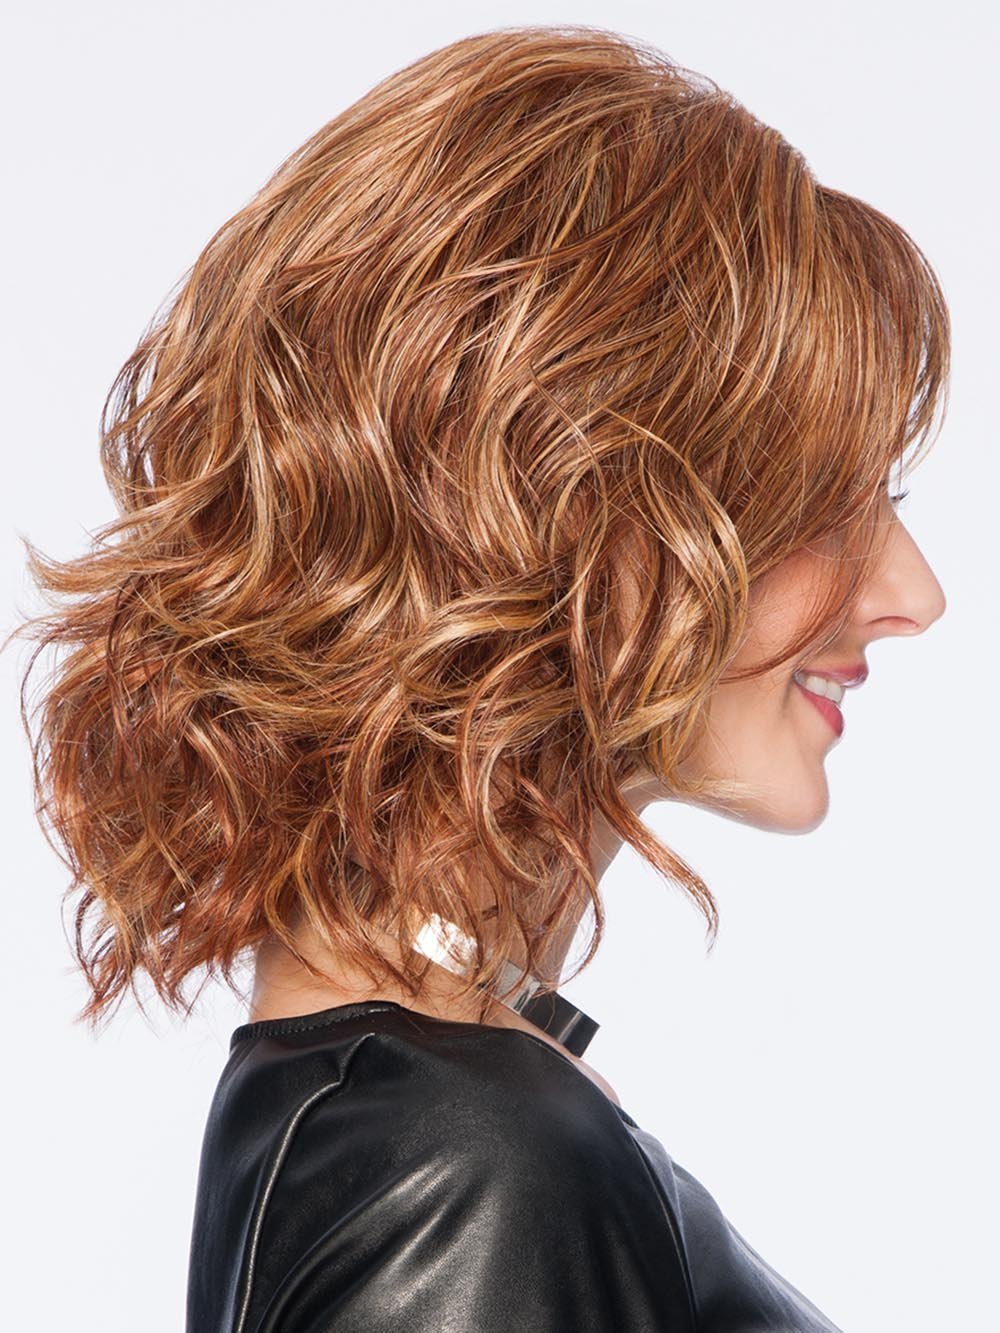 The versatile TOUSLED BOB Wig by Hairdo is the ideal way for any woman to change her look on a whim or handle a bad hair day.